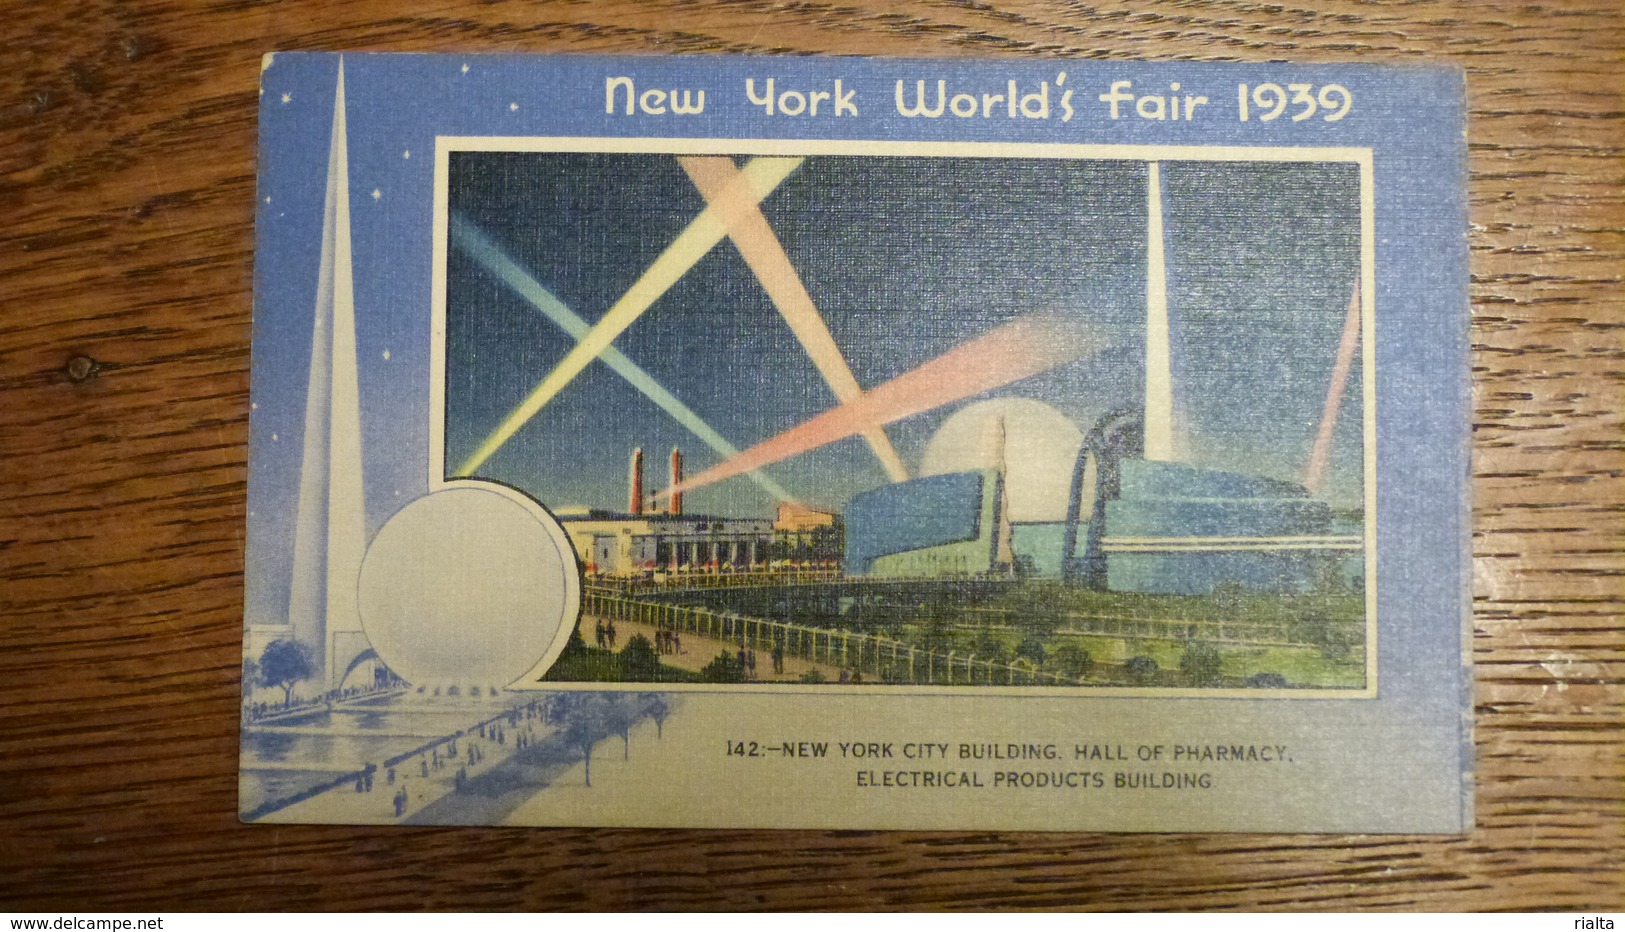 ETATS-UNIS, NEW YORK WORLD'S FAIR 1939, NEW YORK CITY BUILDING, HALL OF PHARMACY ELECTRICAL PRODUCTS BUILDING - Expositions